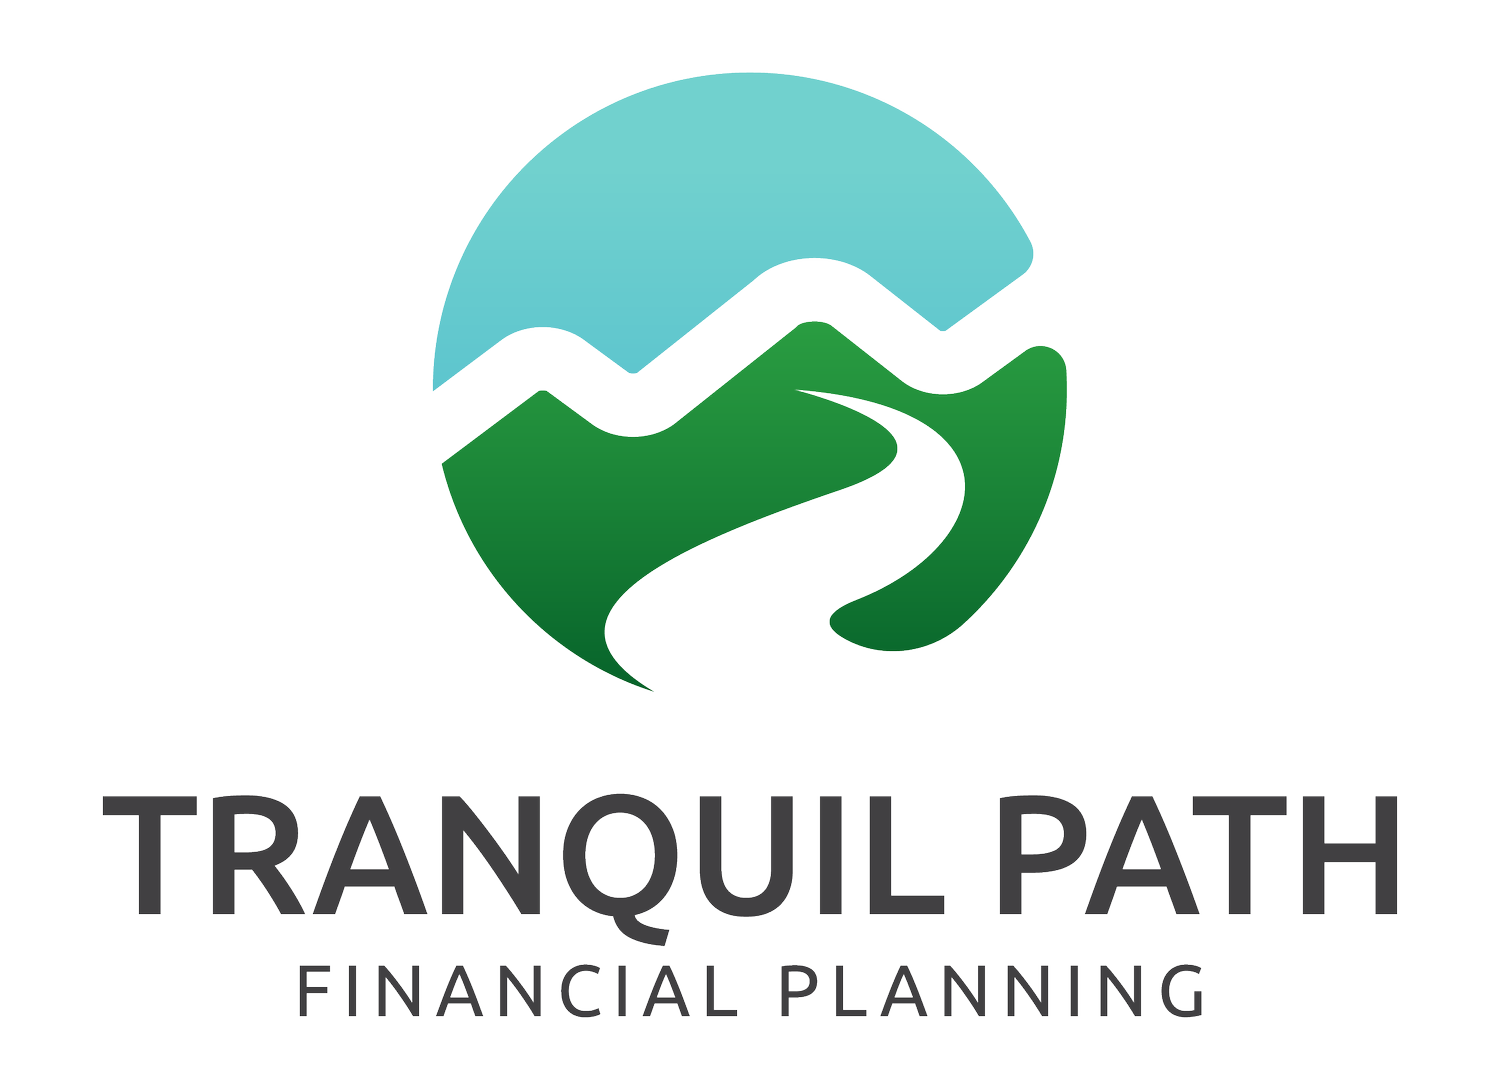 Tranquil Path Financial Planning